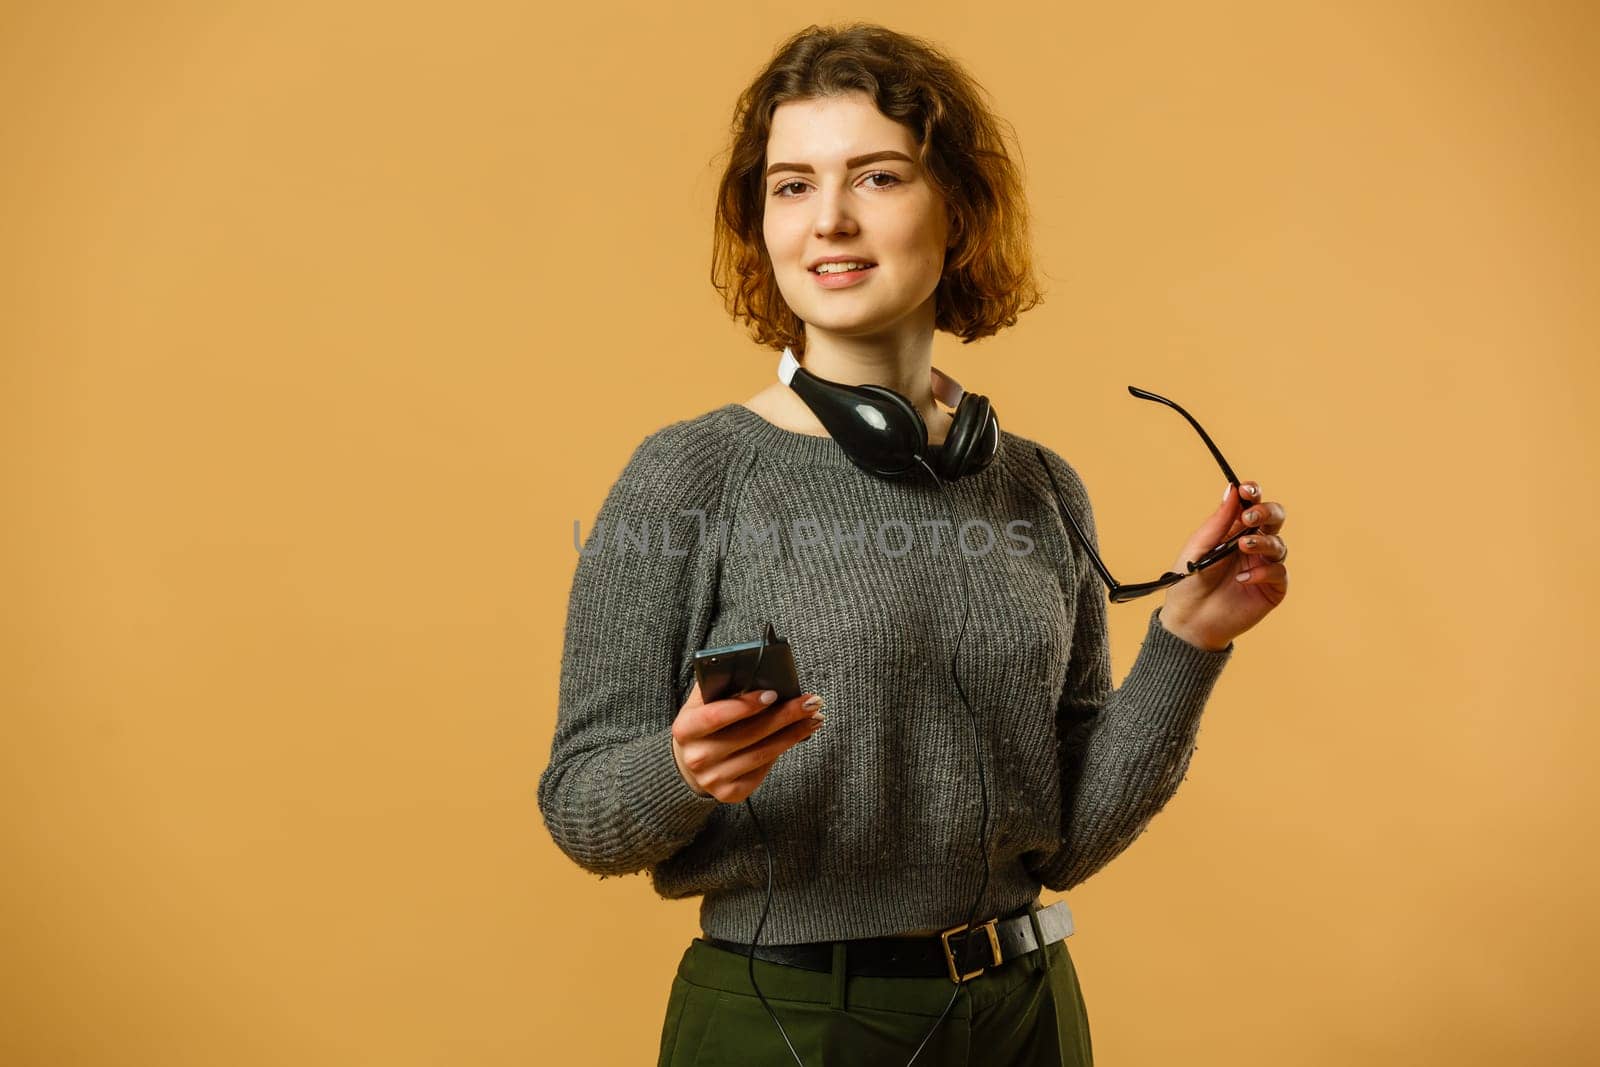 Smiling woman listening music in headphones and using smartphone over yellow background by Andelov13